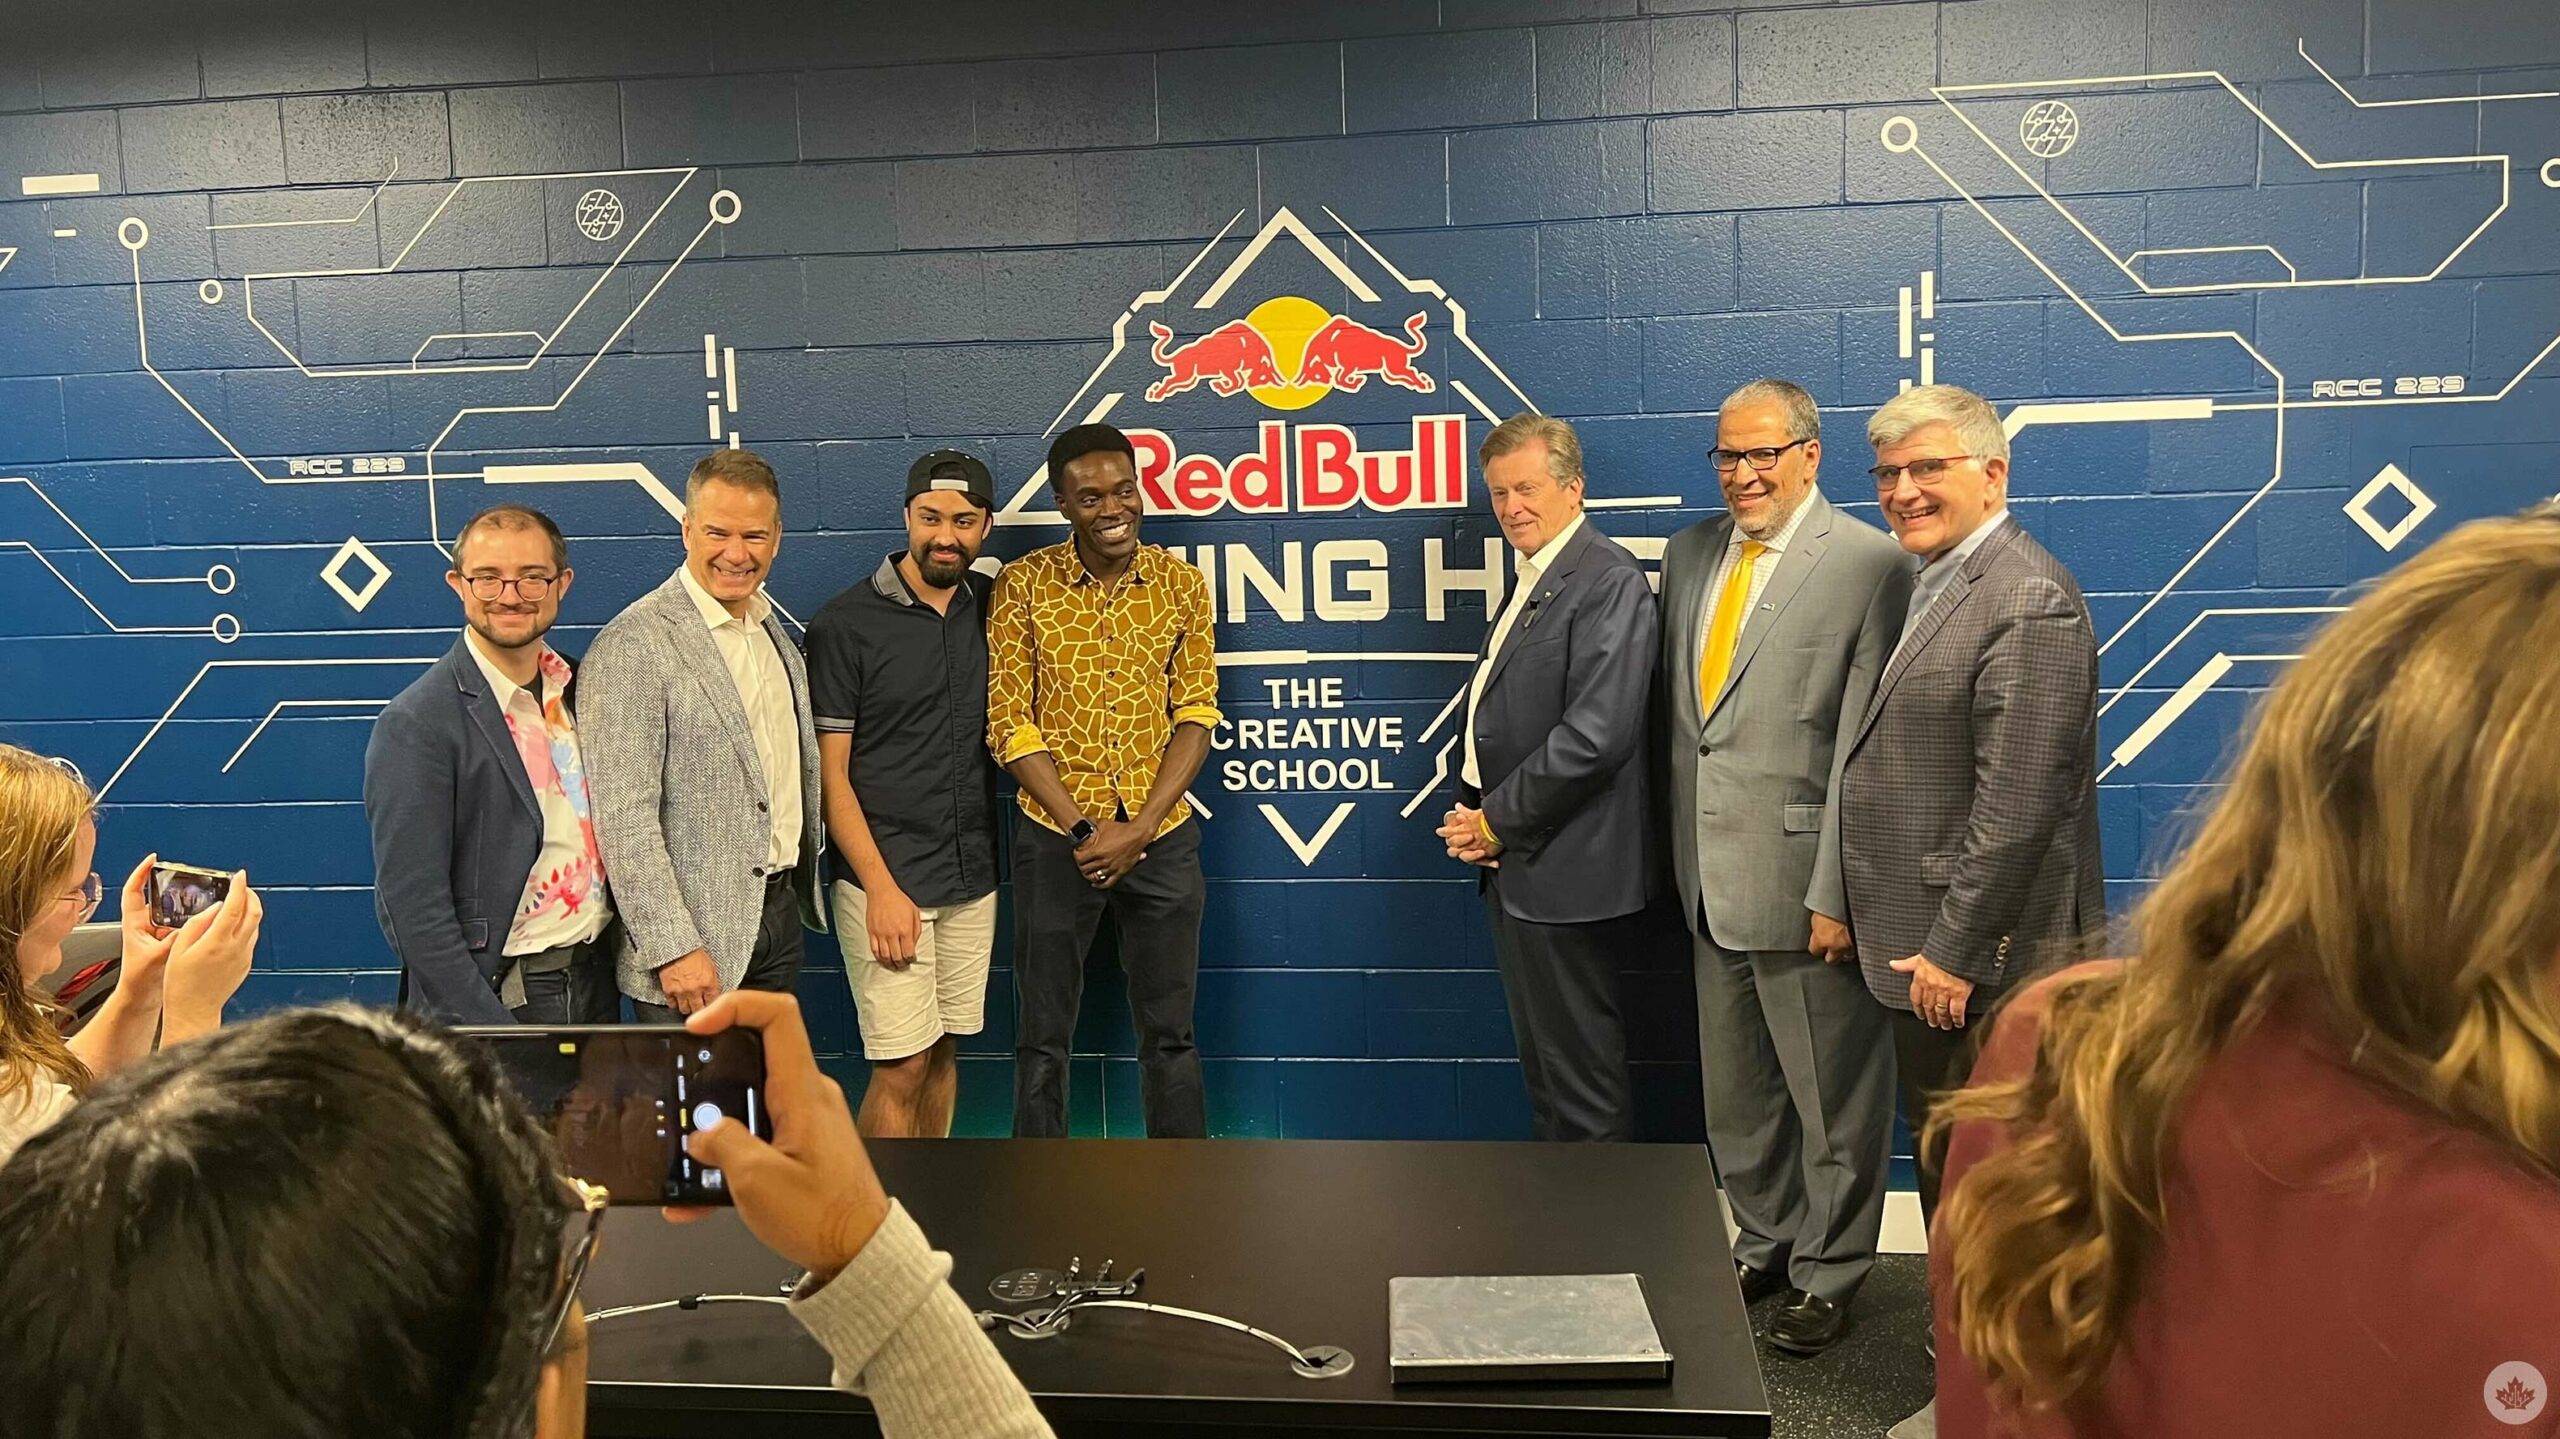 Metropolitan launches Red Bull Gaming Hub to help grow city's games industry